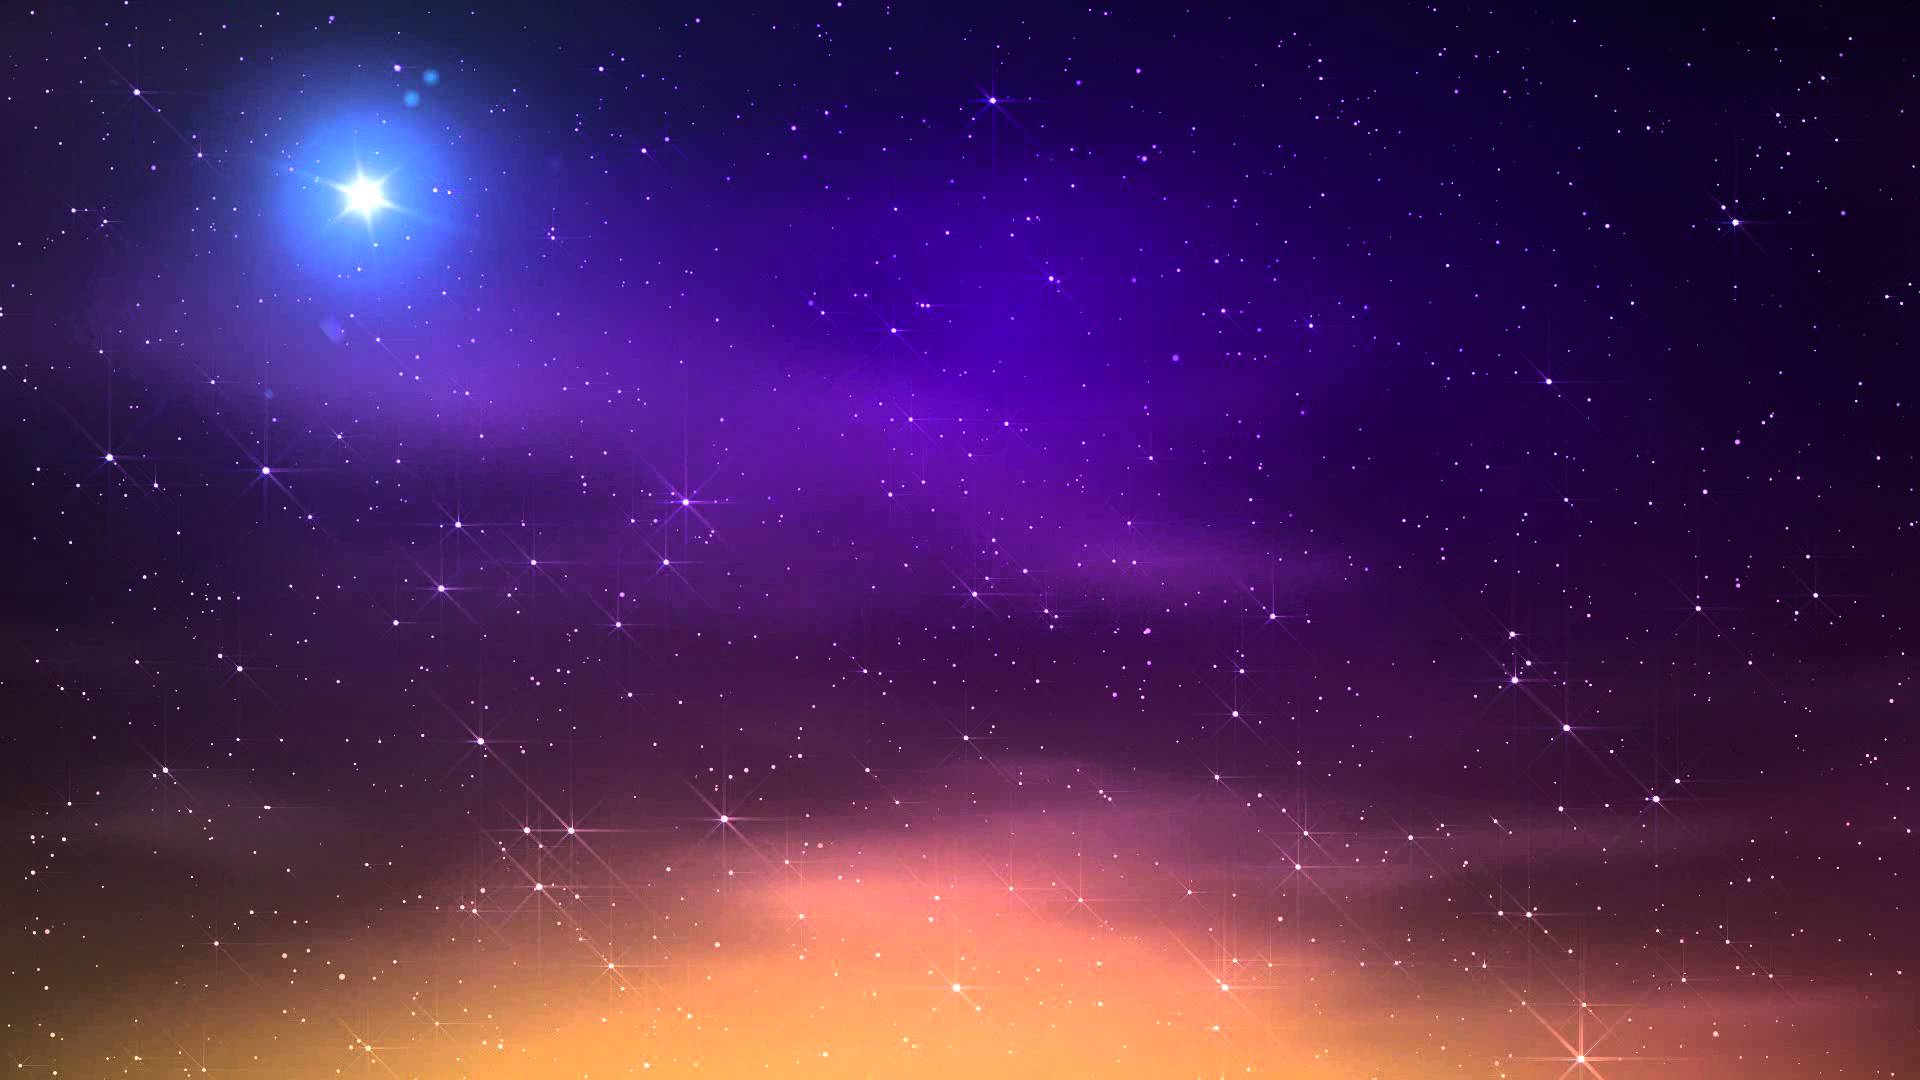 Night Sky Backgrounds Hd - Wallpaper Cave